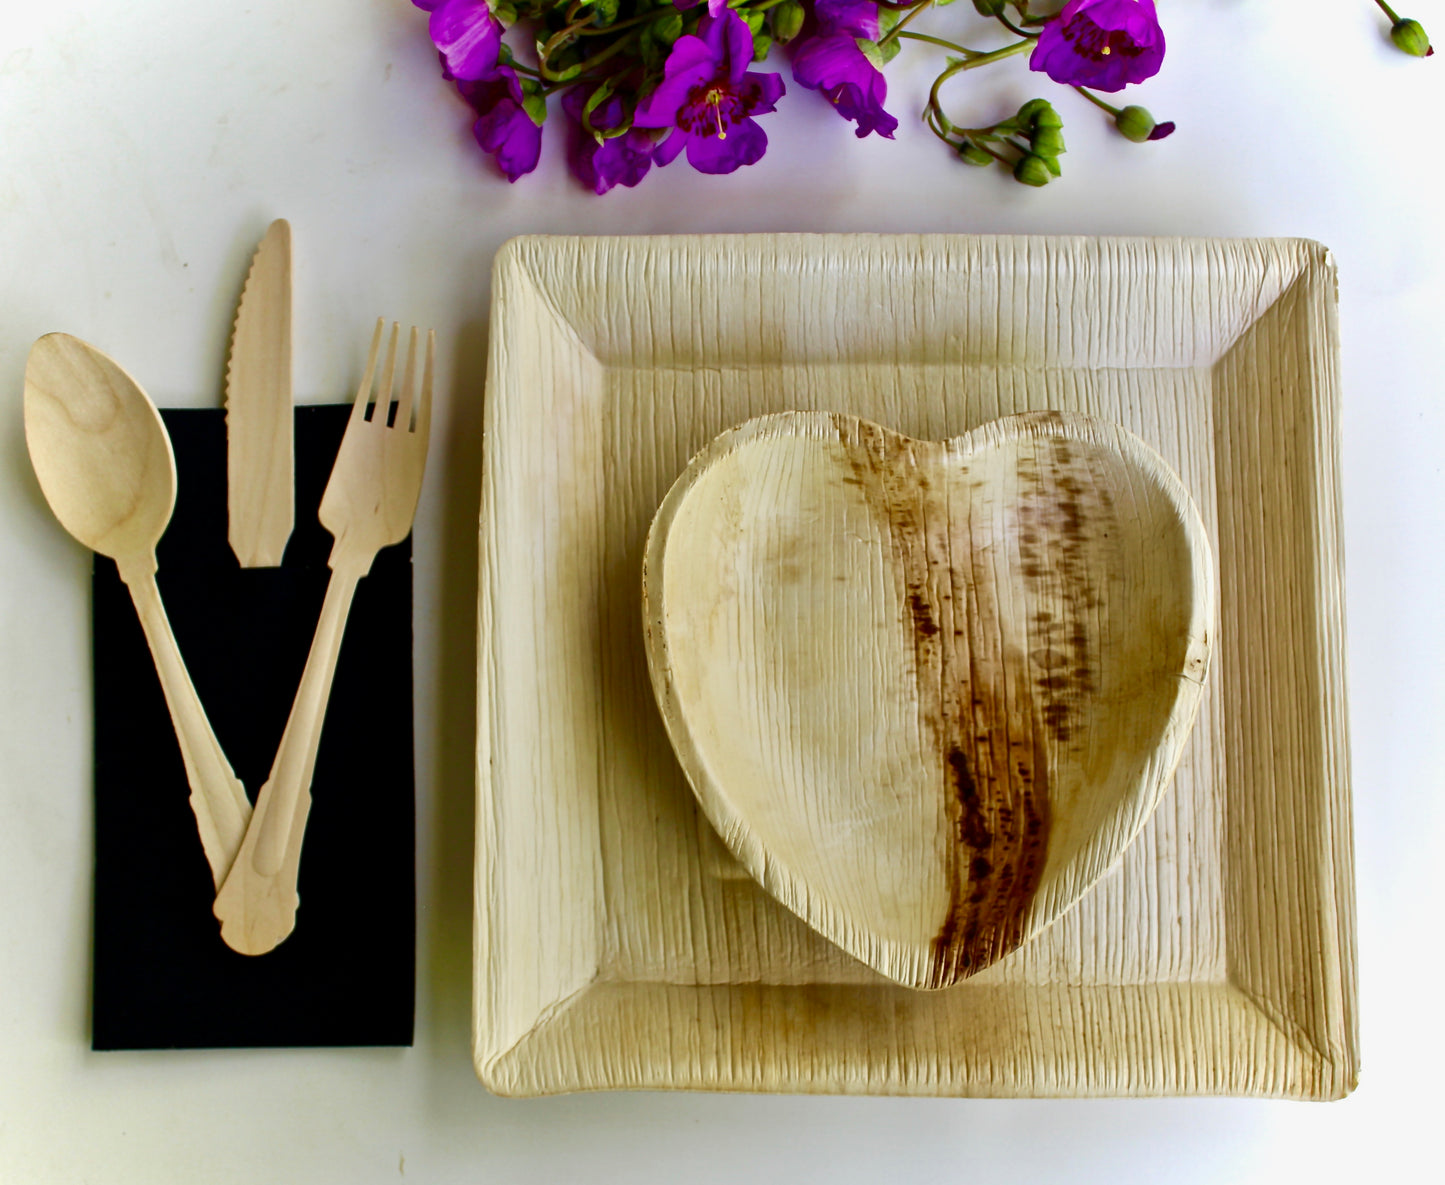 palm leaf plates 10 pice 10" Square deep   - 10 pic 6" Heart   and   30  pic cutler - 50 pic napkin   disposable and biodegrable - compostable